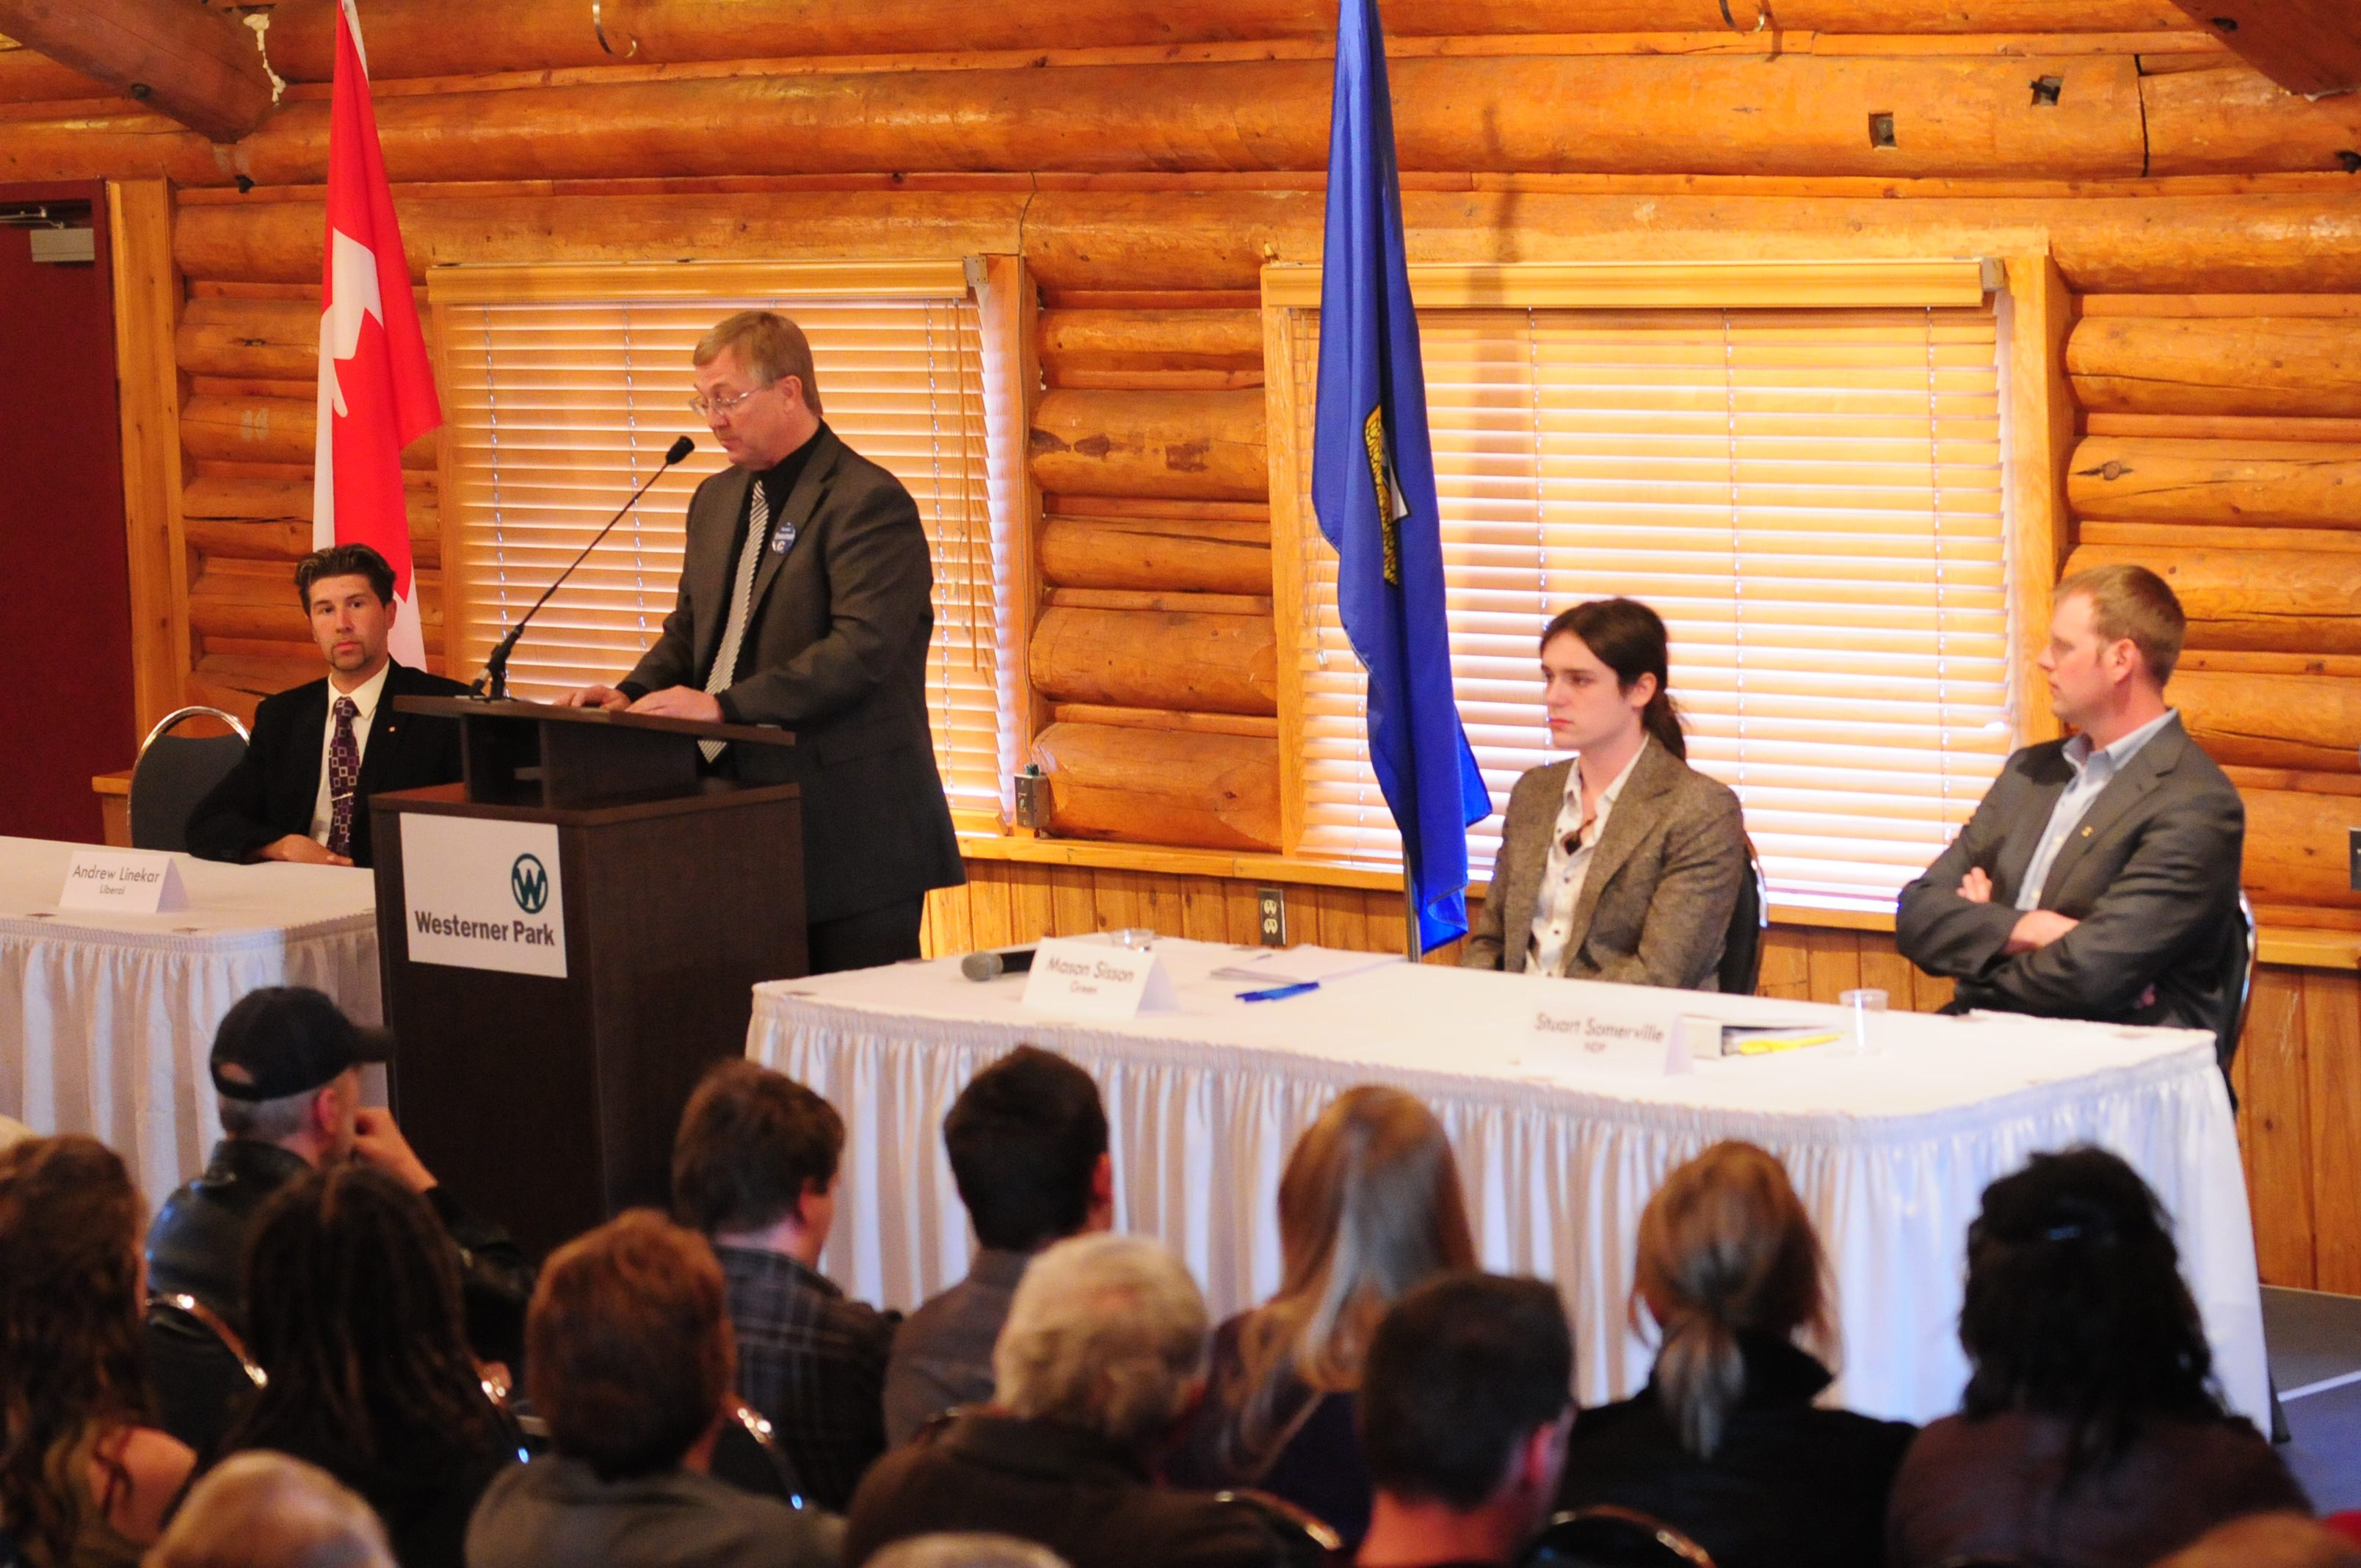 COLLECTING SUPPORT- Candidates for the upcoming election on May 2 spoke Monday night at a forum at the Chalet at the Westerner to answer questions from the media and the public. From left is Andrew Lineker (Liberals)